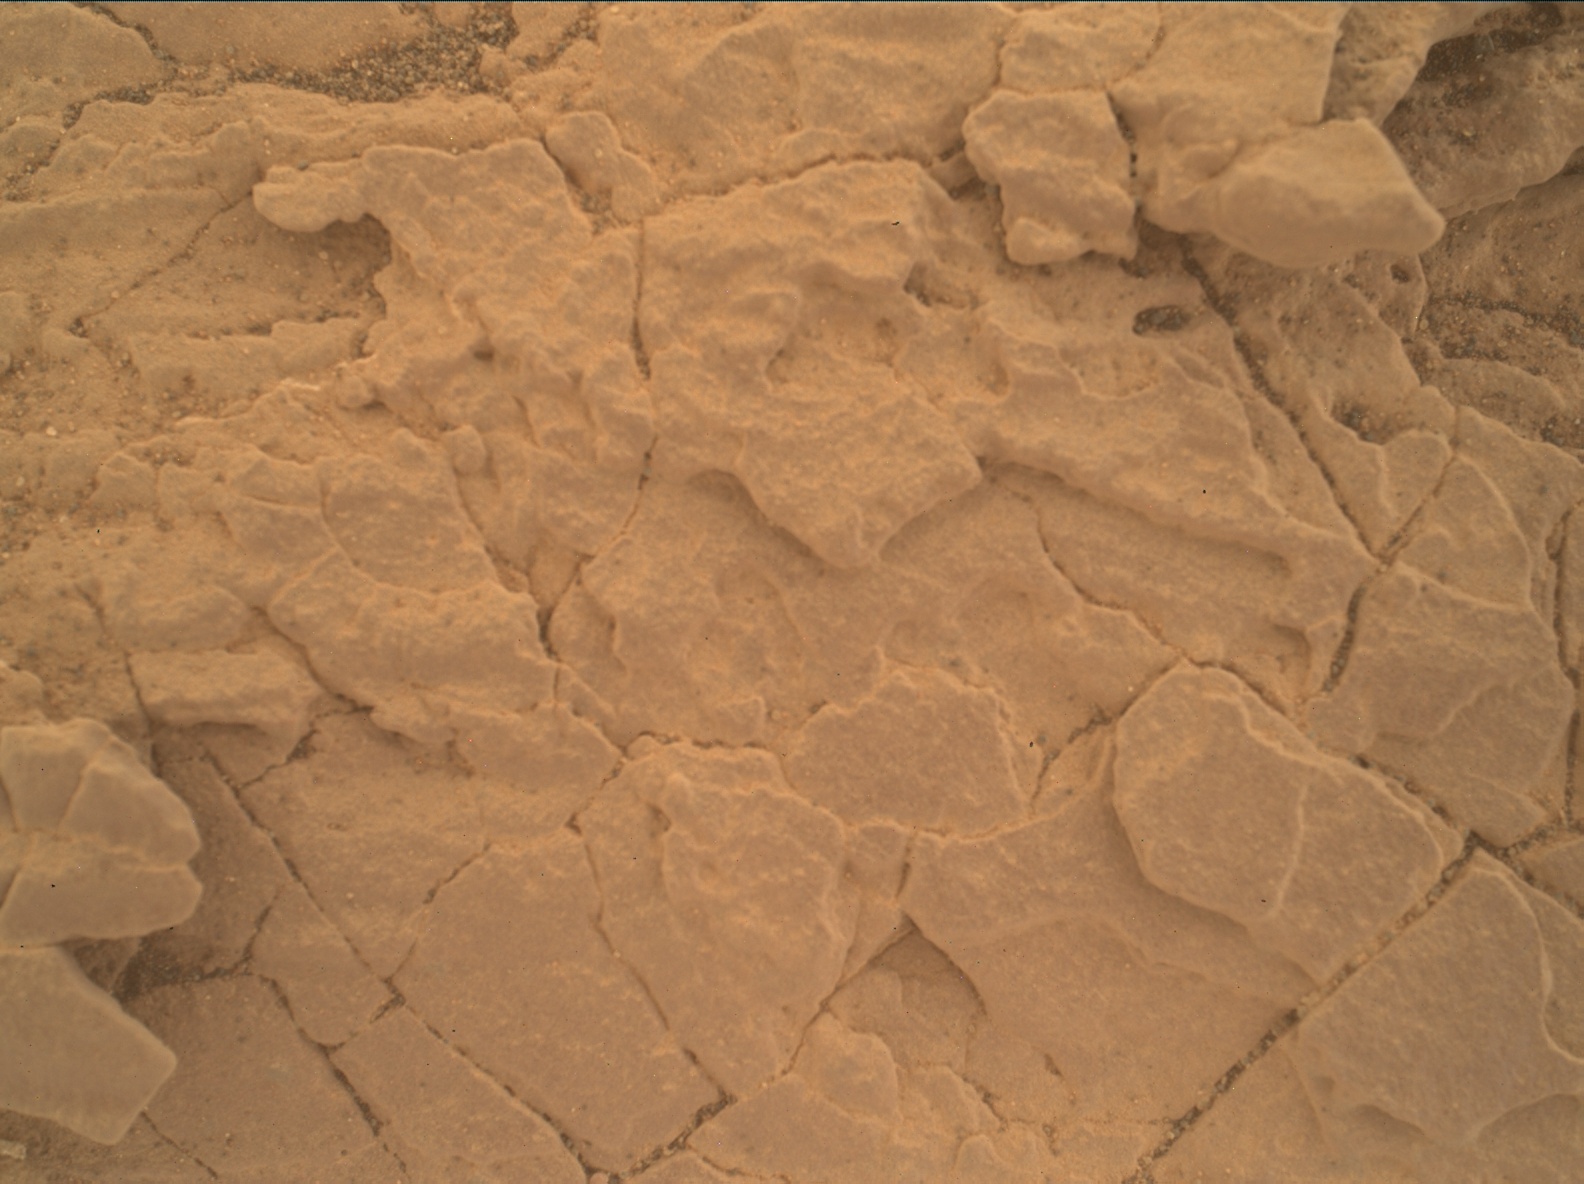 Nasa's Mars rover Curiosity acquired this image using its Mars Hand Lens Imager (MAHLI) on Sol 2454